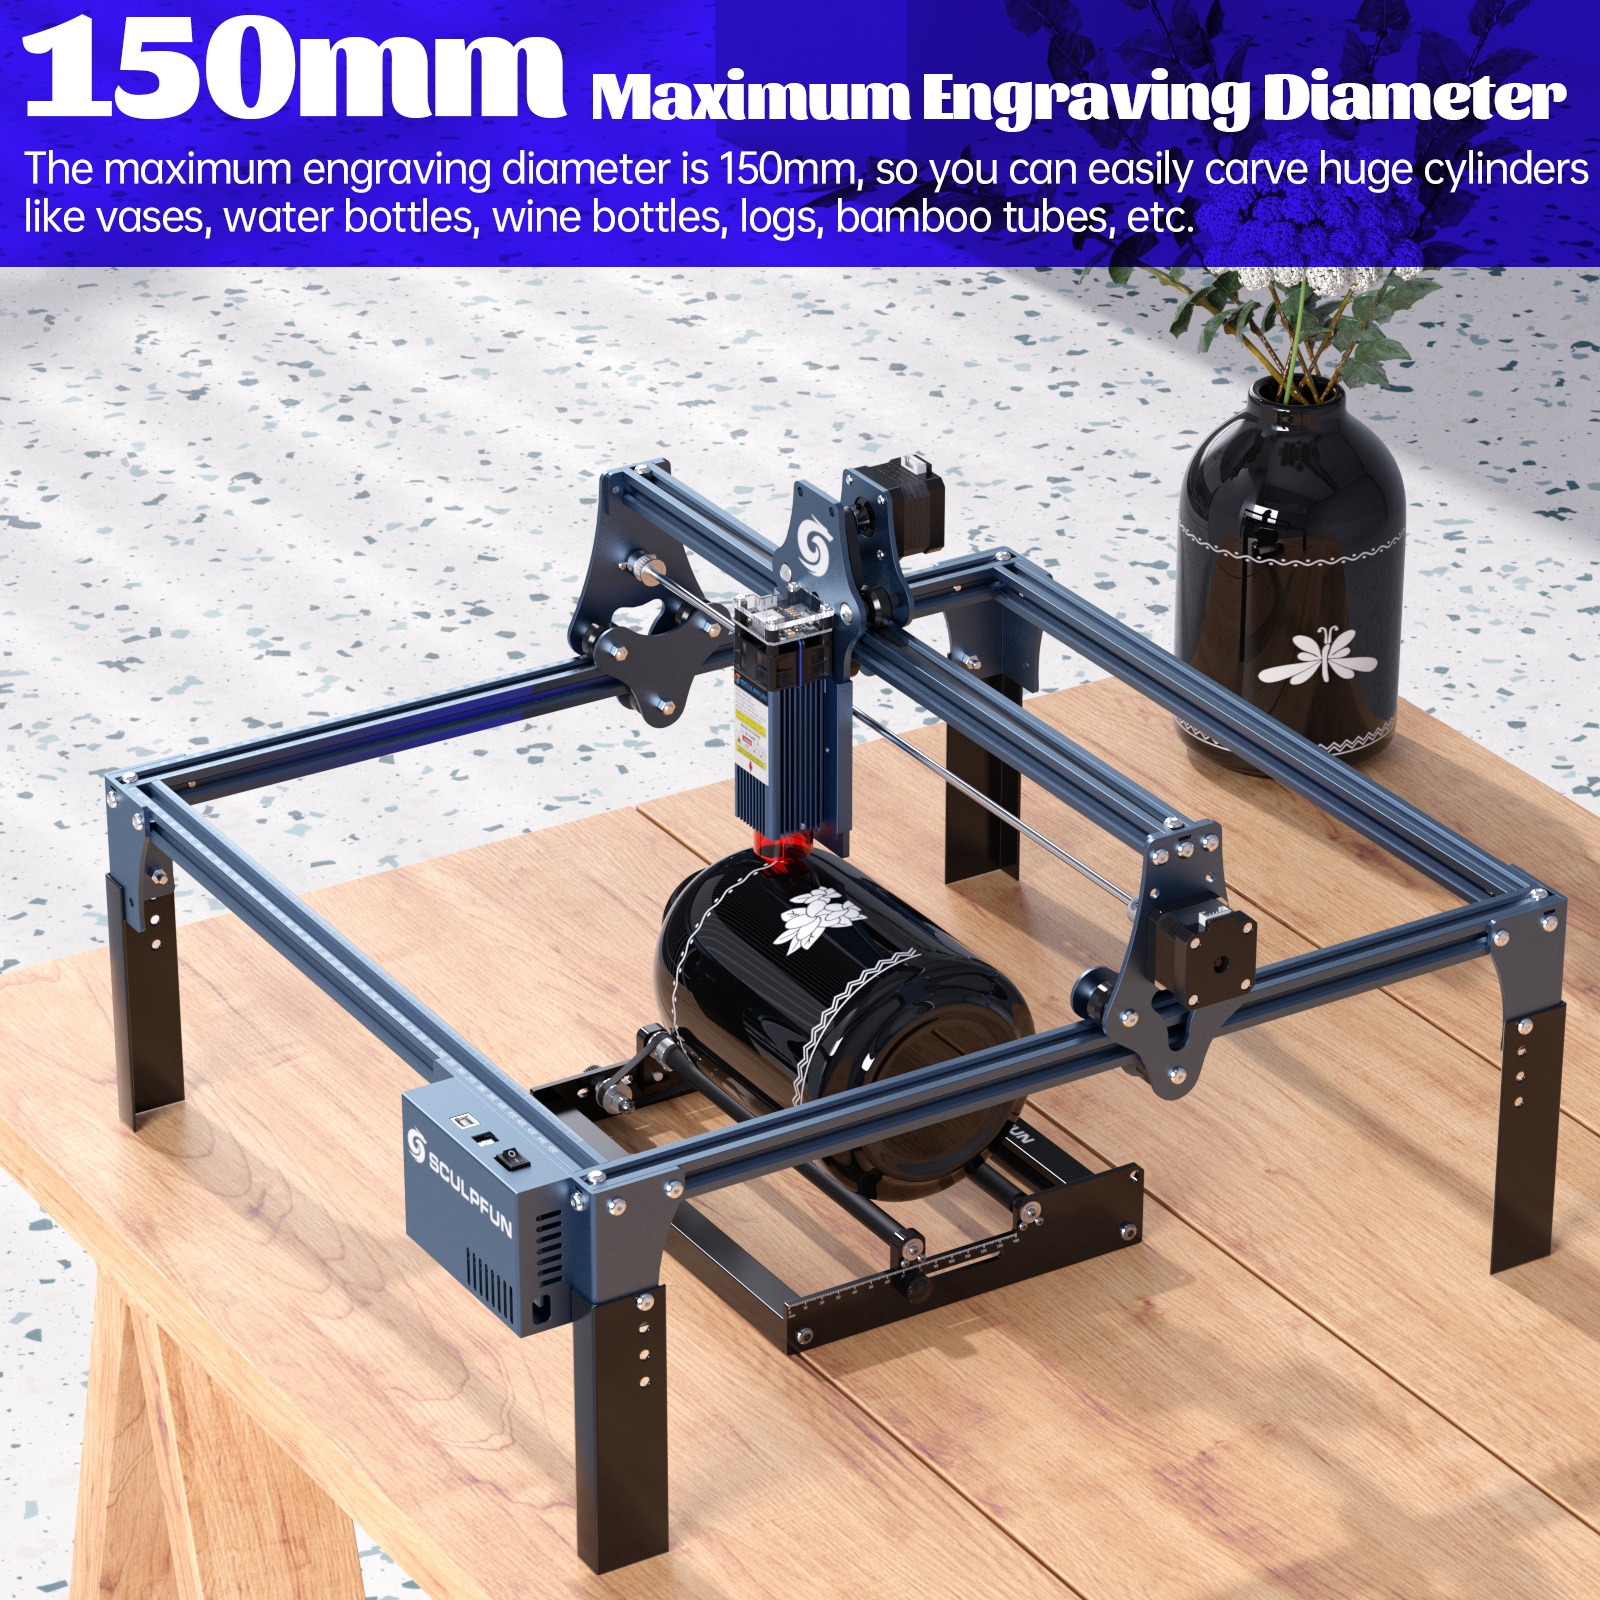 SCULPFUN-Laser-Rotary-Roller-for-S9-Laser-Engraver-Y-axis-Roller-360-degree-Rotating-for-6-150mm-Eng-1934417-5